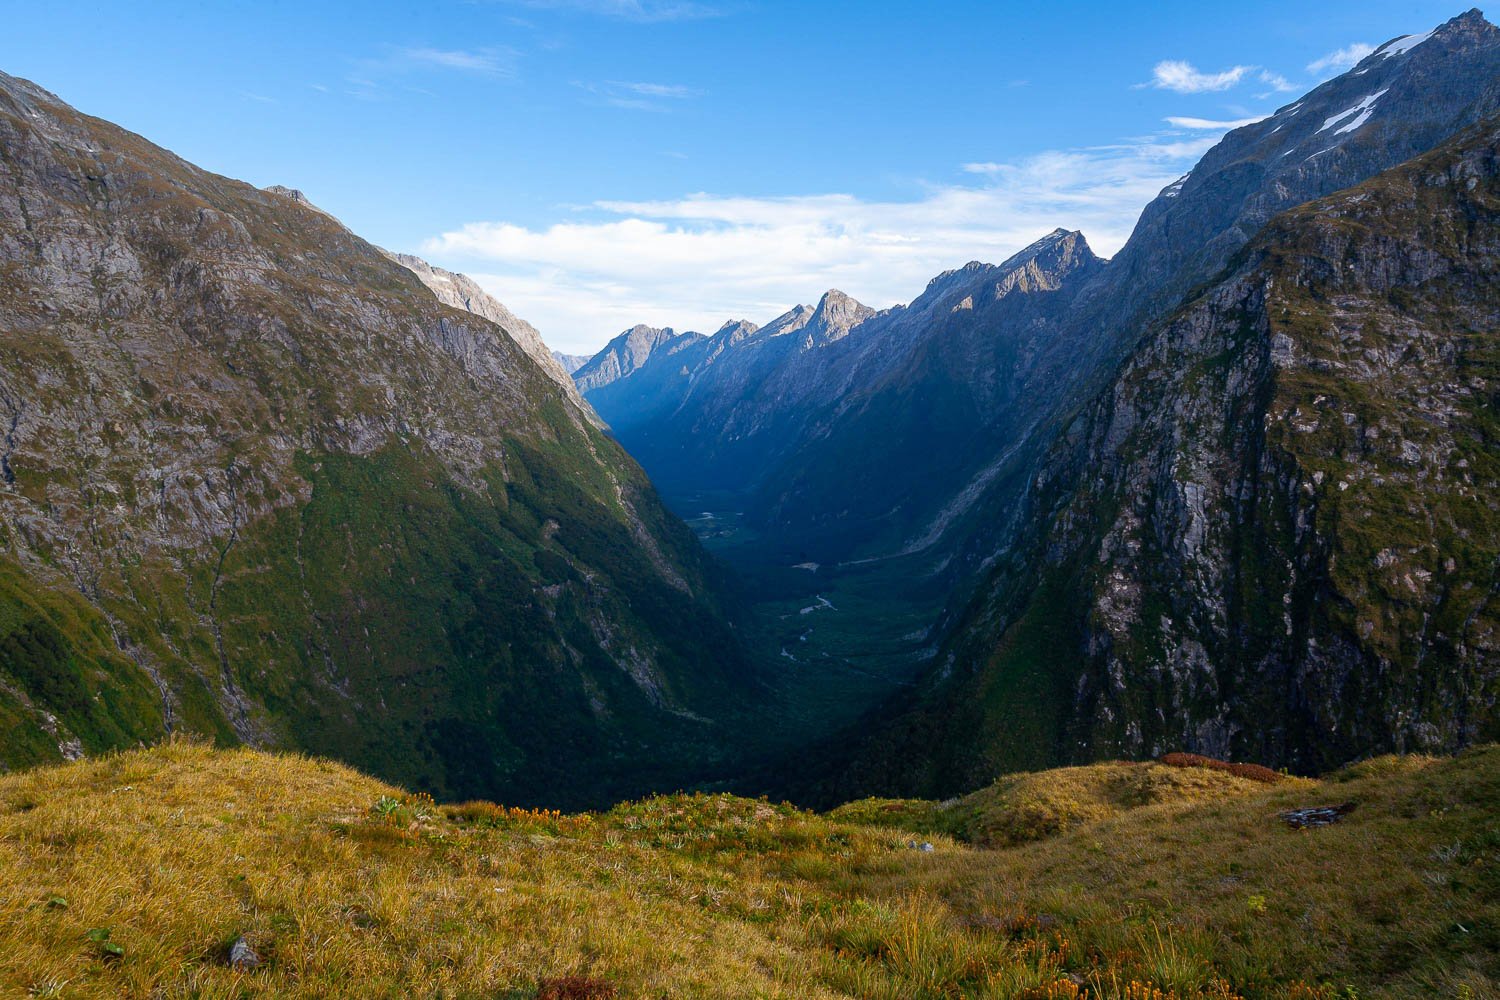 A High and beautiful sequence of green mountains fully covered with grass and bushes, Clinton Valley, Milford Track - New Zealand